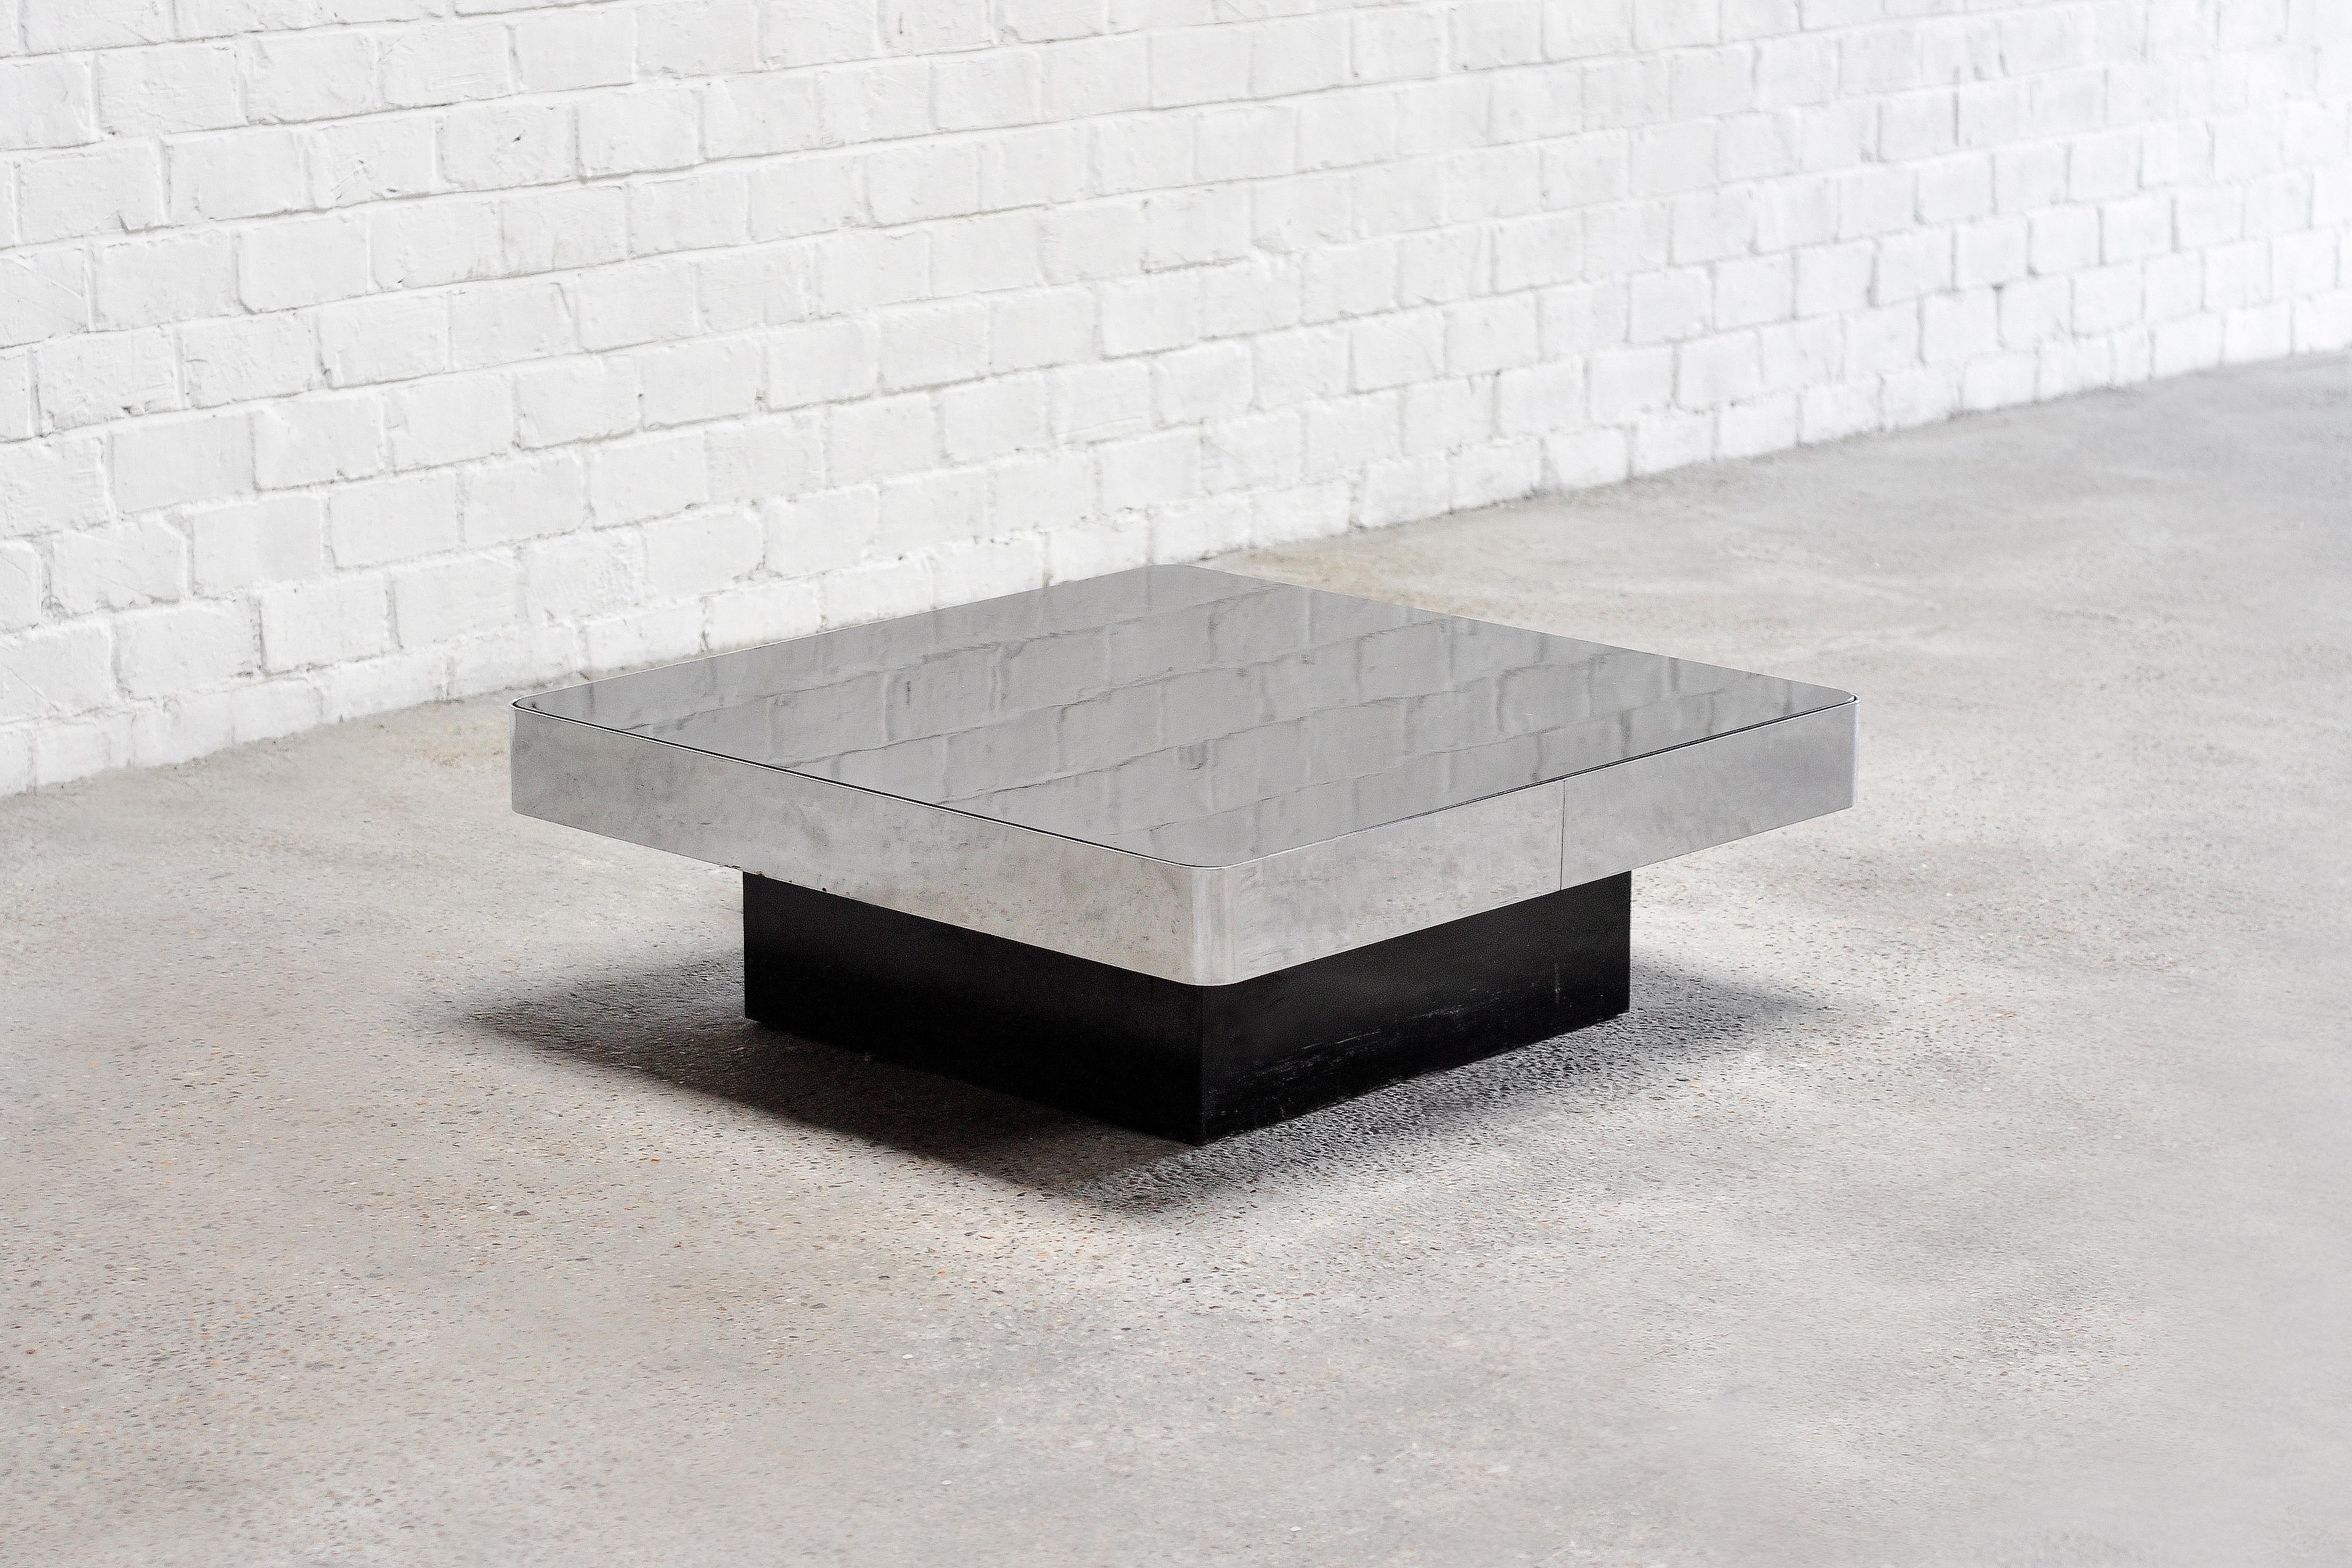 A 1970's coffee table designed by François Monnet, model 'Mangouste'. Produced by Kappa France. This model feautures a black lacquered wooden base, brushed steel band and and a smoked mirror glass. A very sophisticated and minimalistic design of